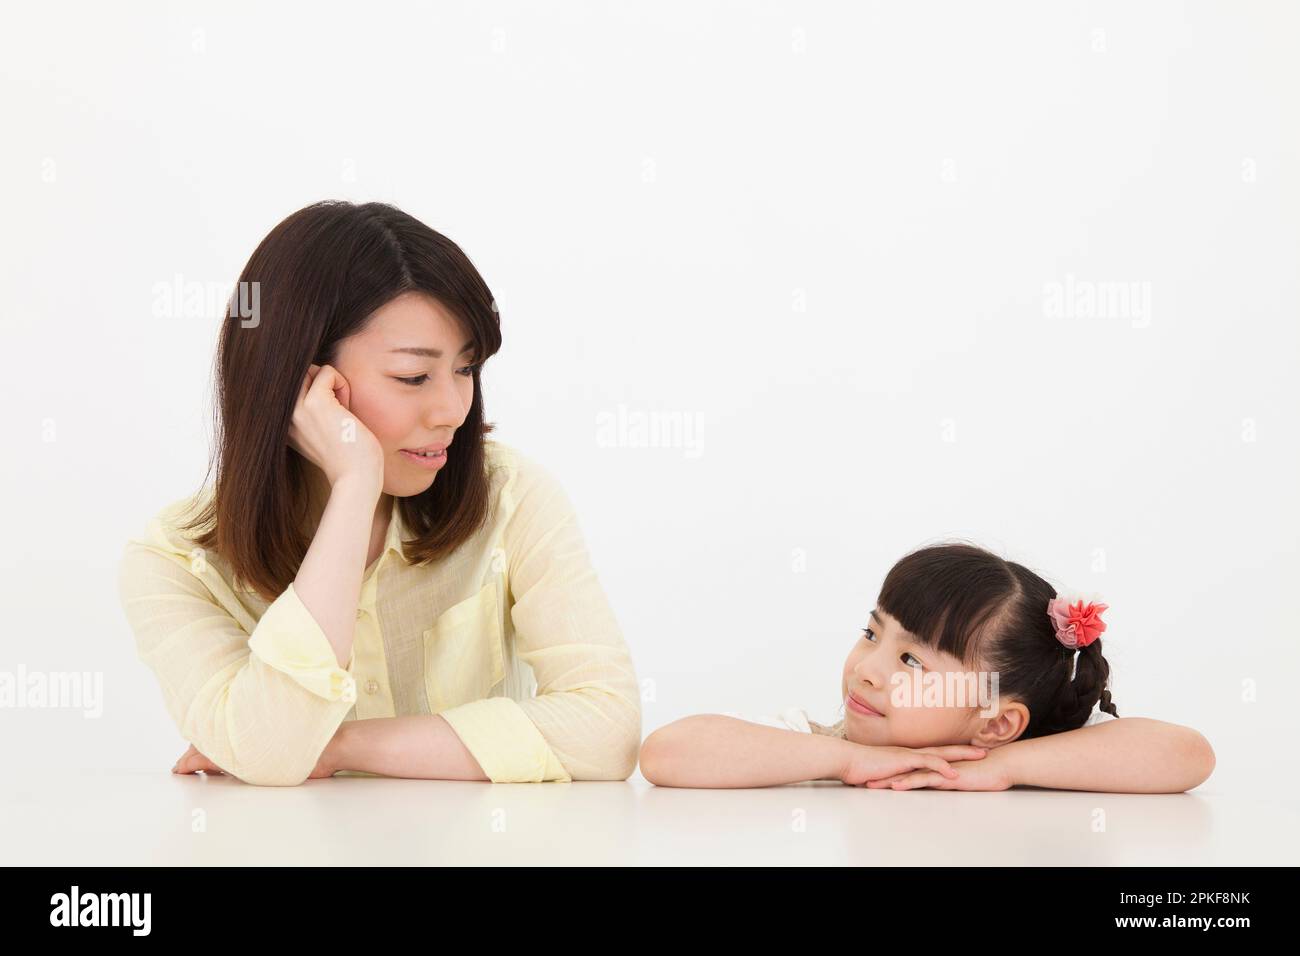 Smiling Woman and Girl Stock Photo